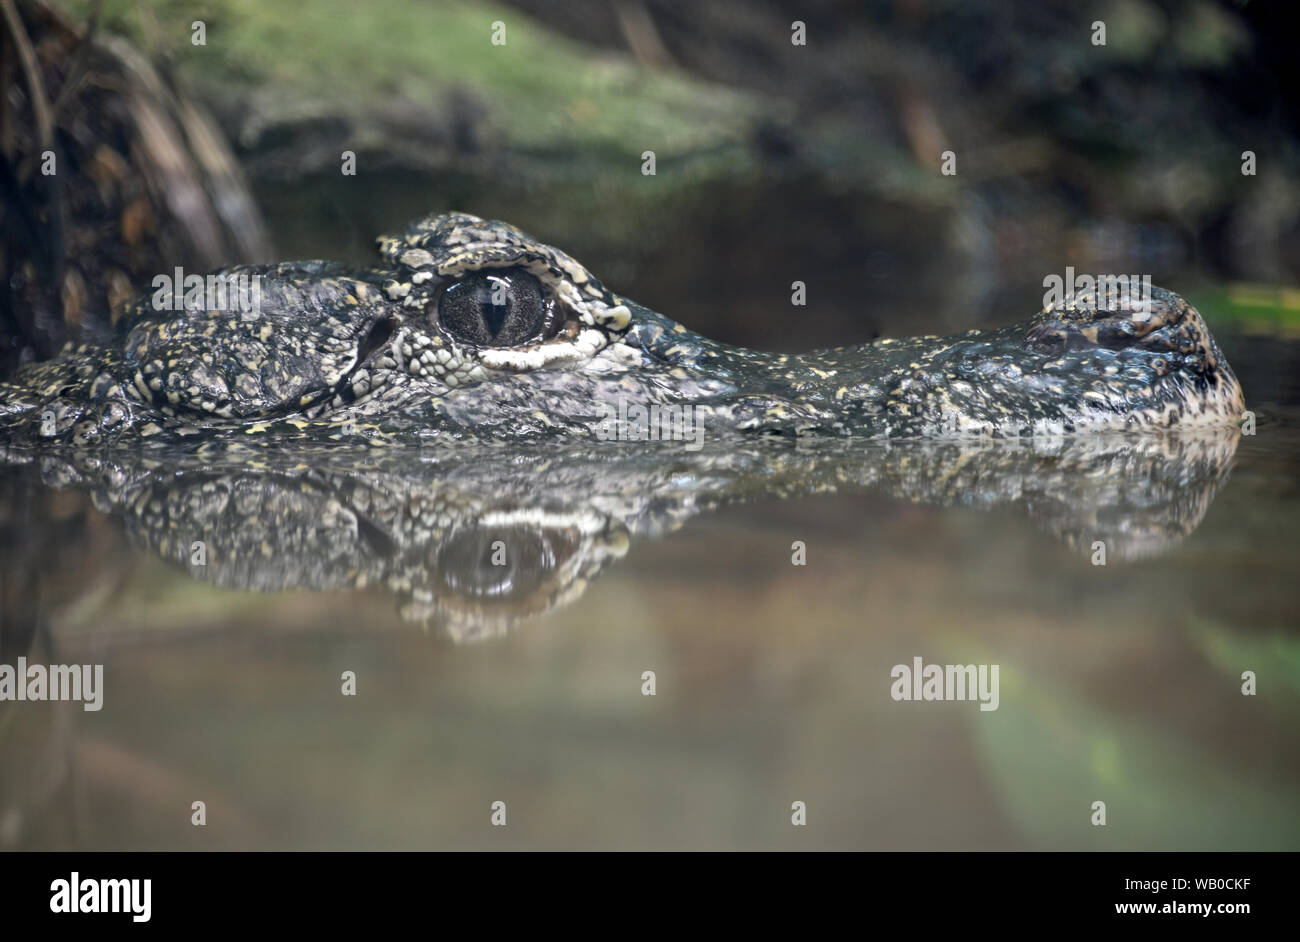 Chinese Alligator waiting on a Meal Stock Photo